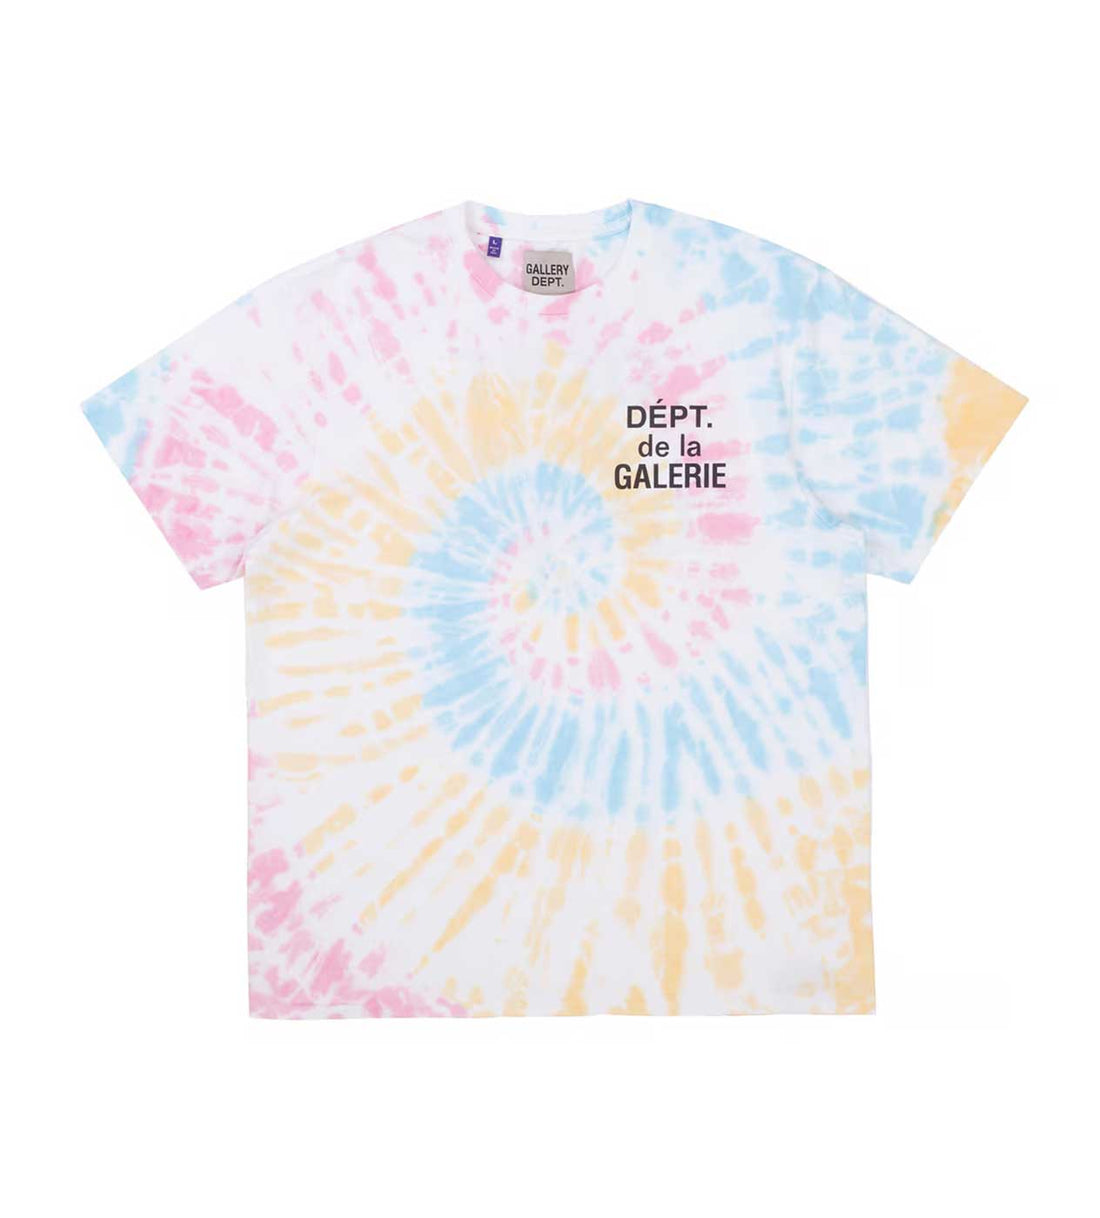 Gallery Dept. French Logo Tee Tie Dye Multicolor front